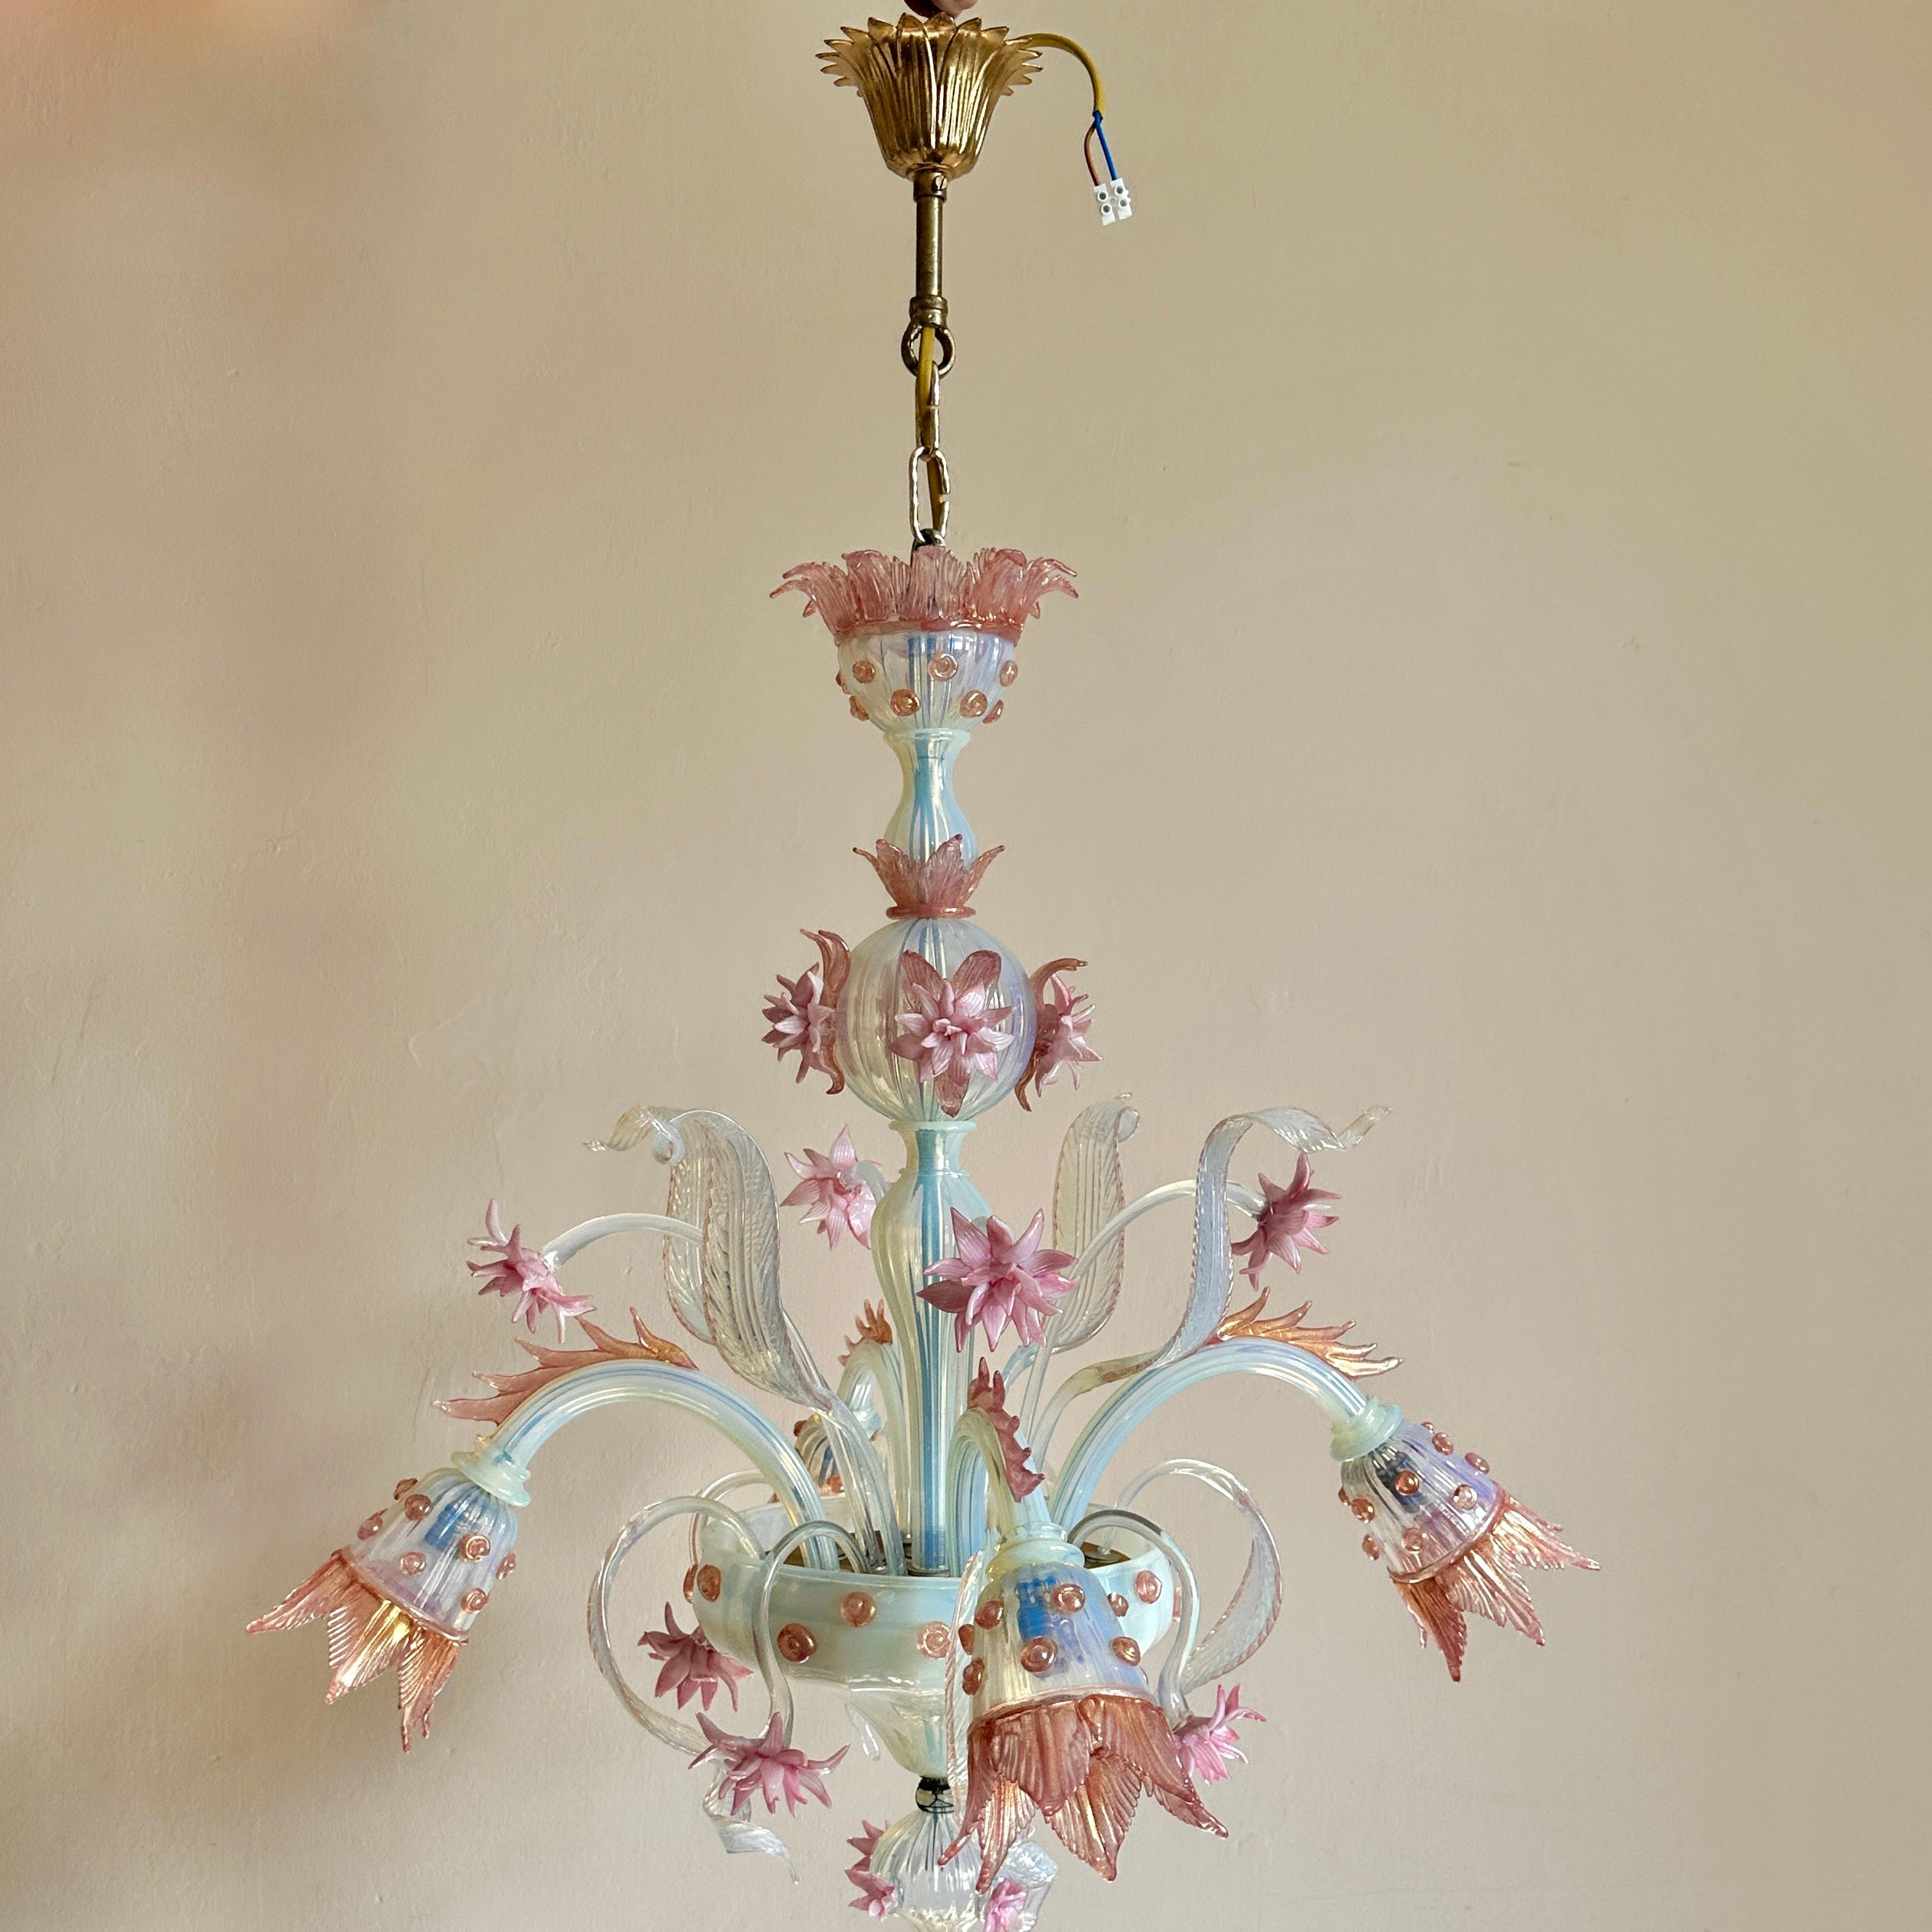 Early C20th Murano opaline glass chandelier.

Exceptional four-arm, handblown glass ceiling light circa 1905. Made by the celebrated Salviati family. In excellent condition with no missing, chipped or repaired parts, the chandelier has been rewired